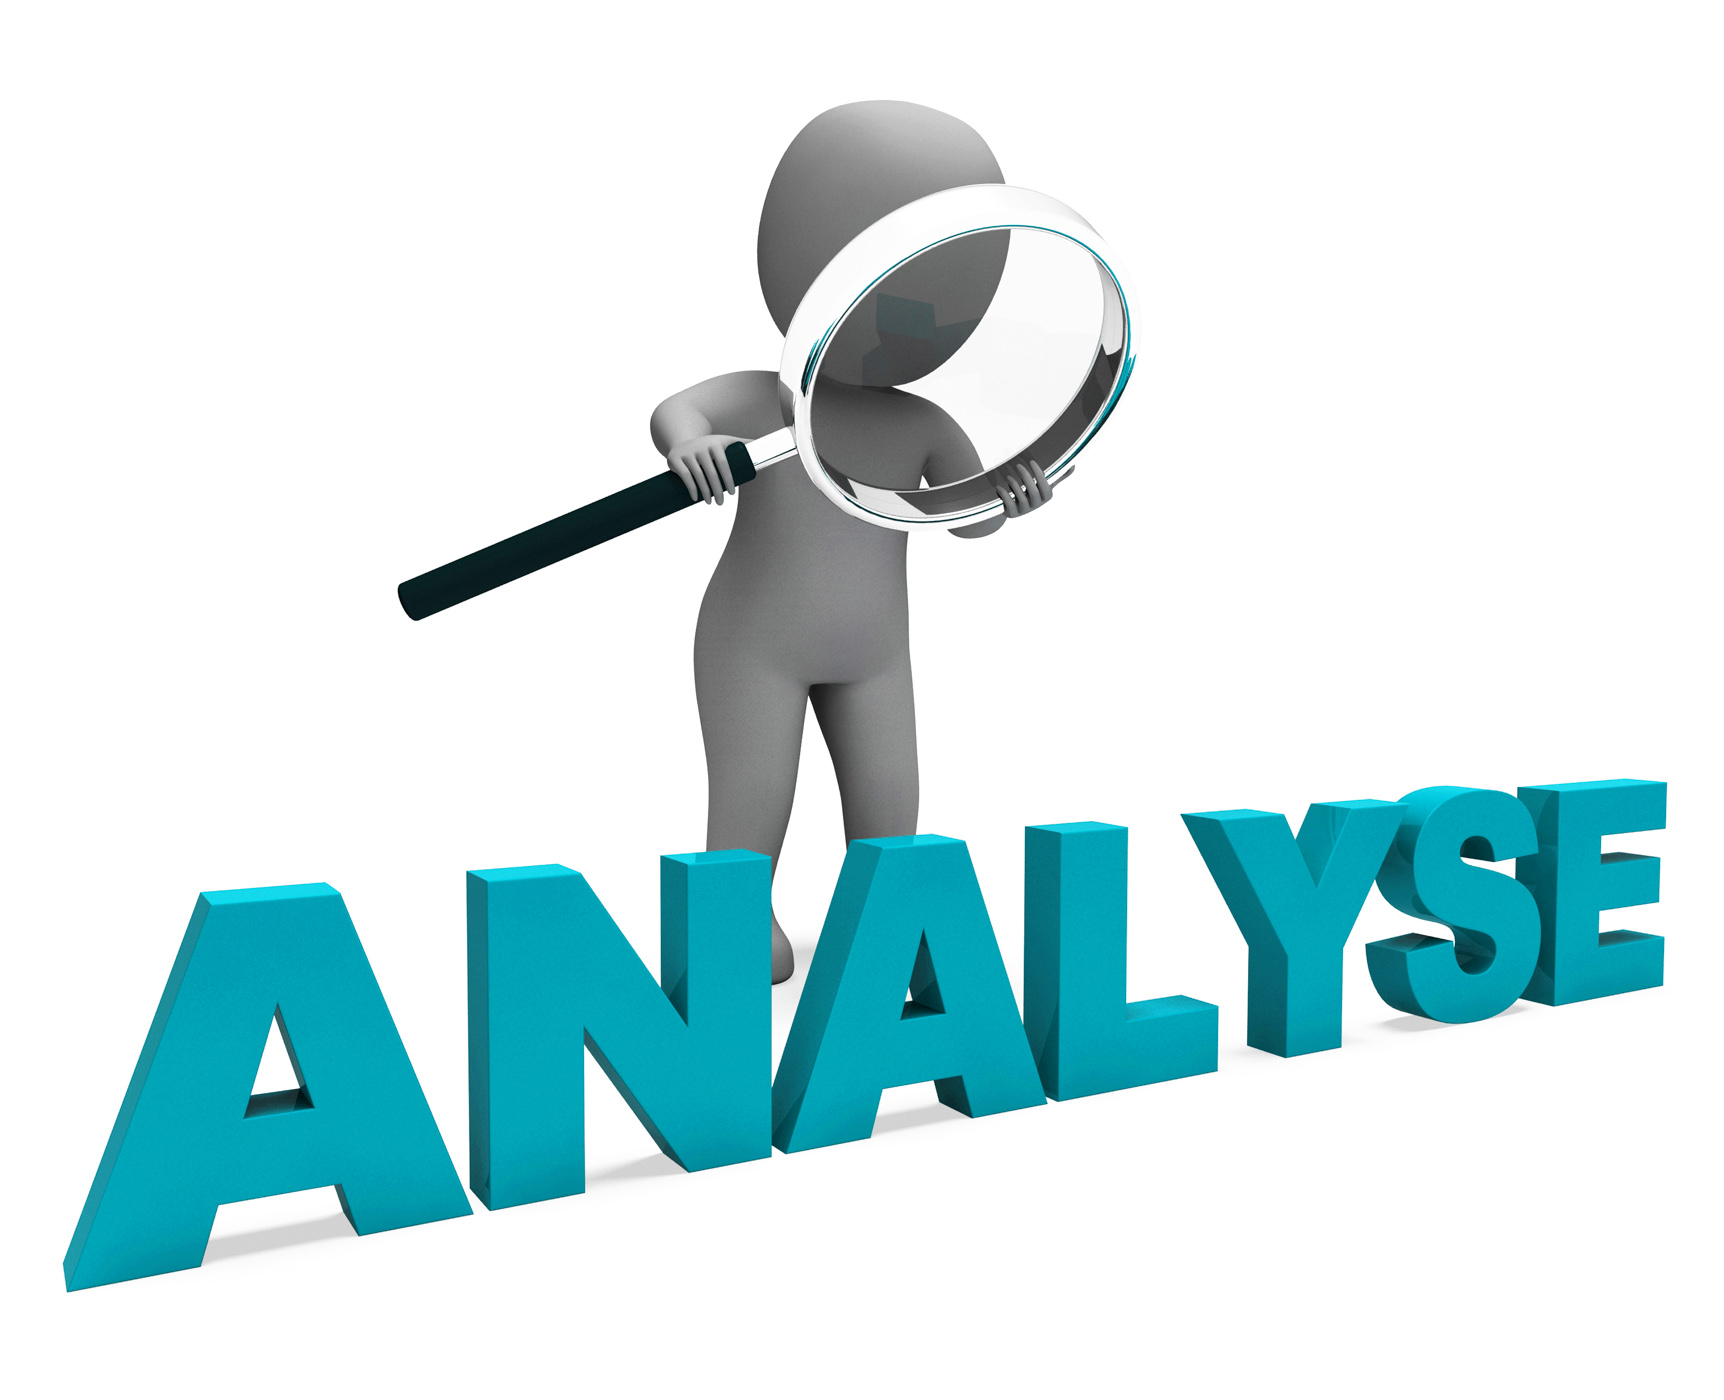 Analyse Character Shows Investigation Analysis Or Analyzing, 3dcharacter, Analyse, Analysis, Analytic, HQ Photo